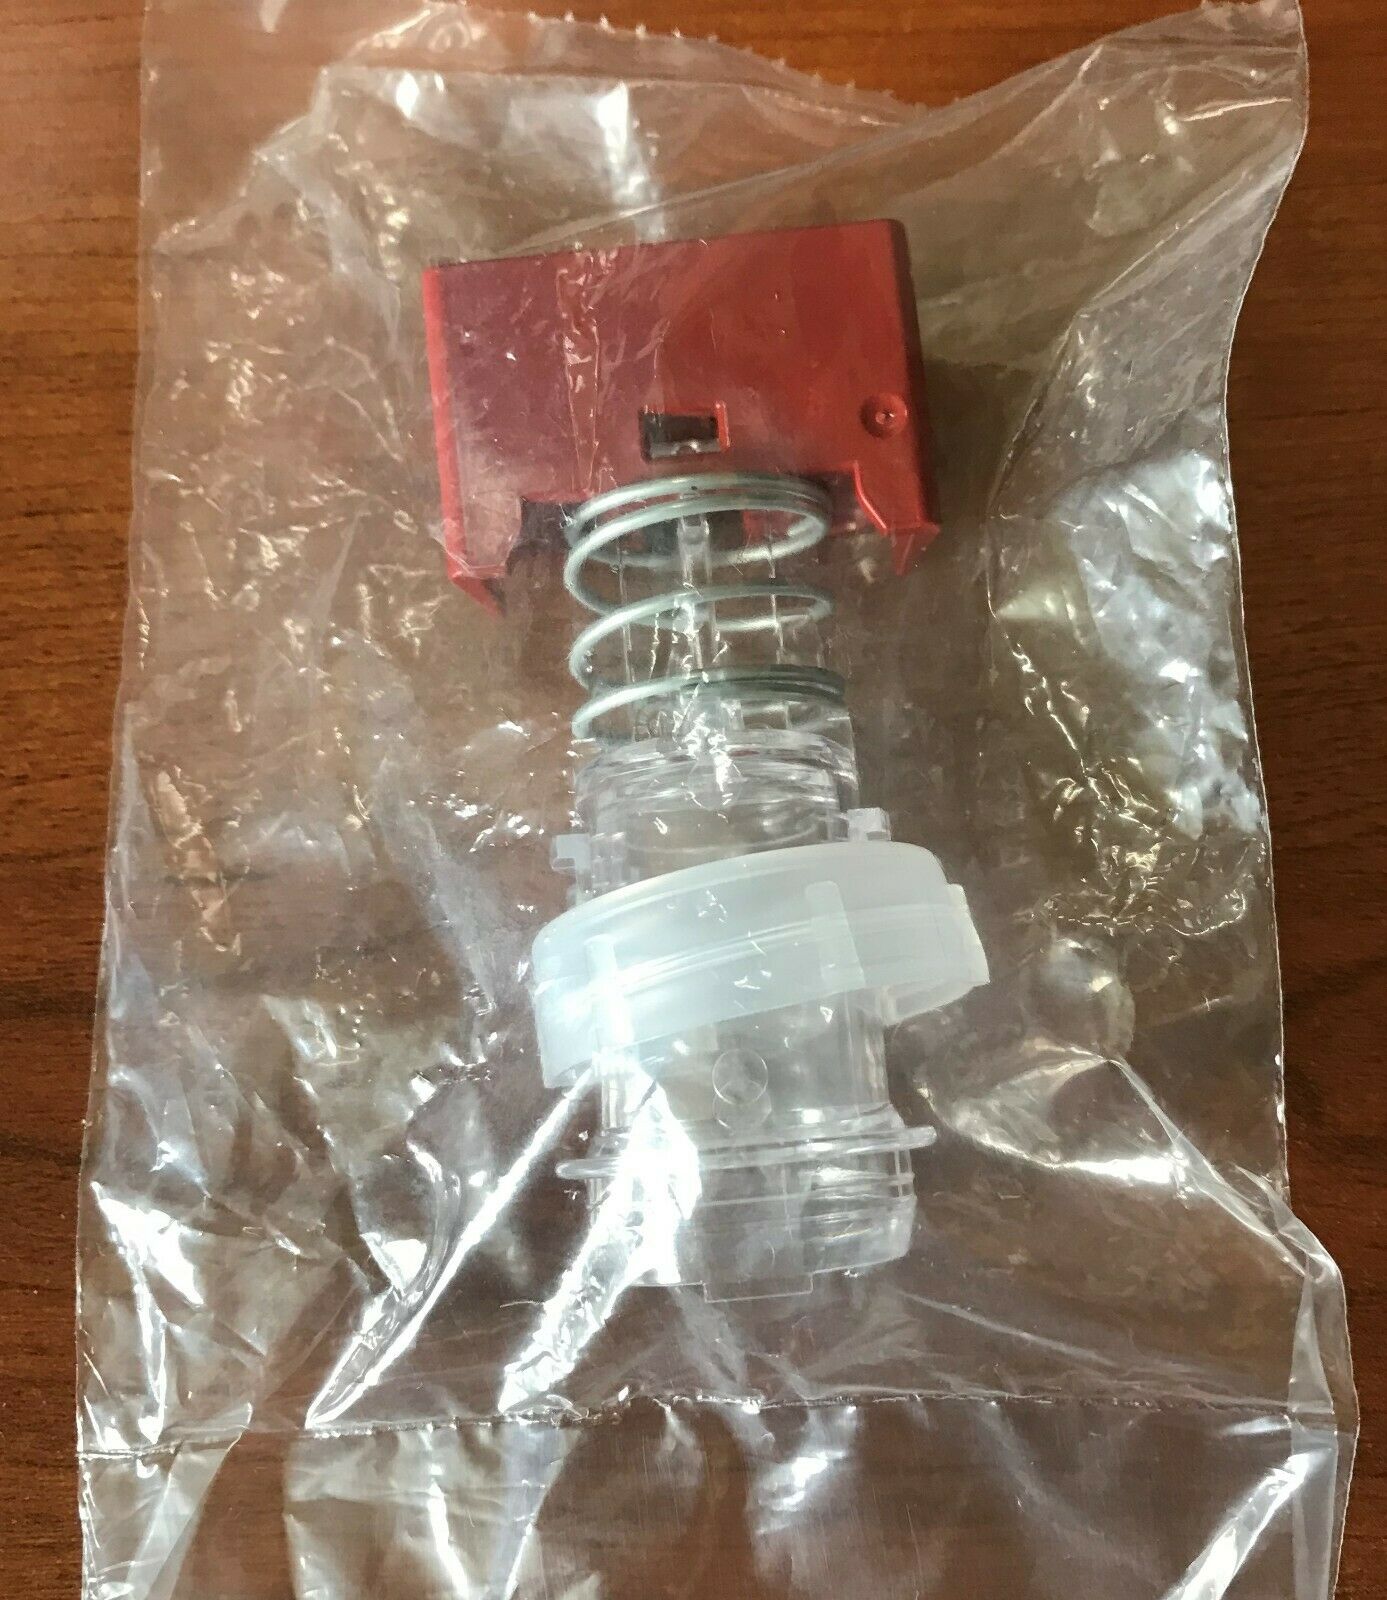 New Gehls Dispenser Push Valve Cheese / Chili Nozzle Ht2 Replacement